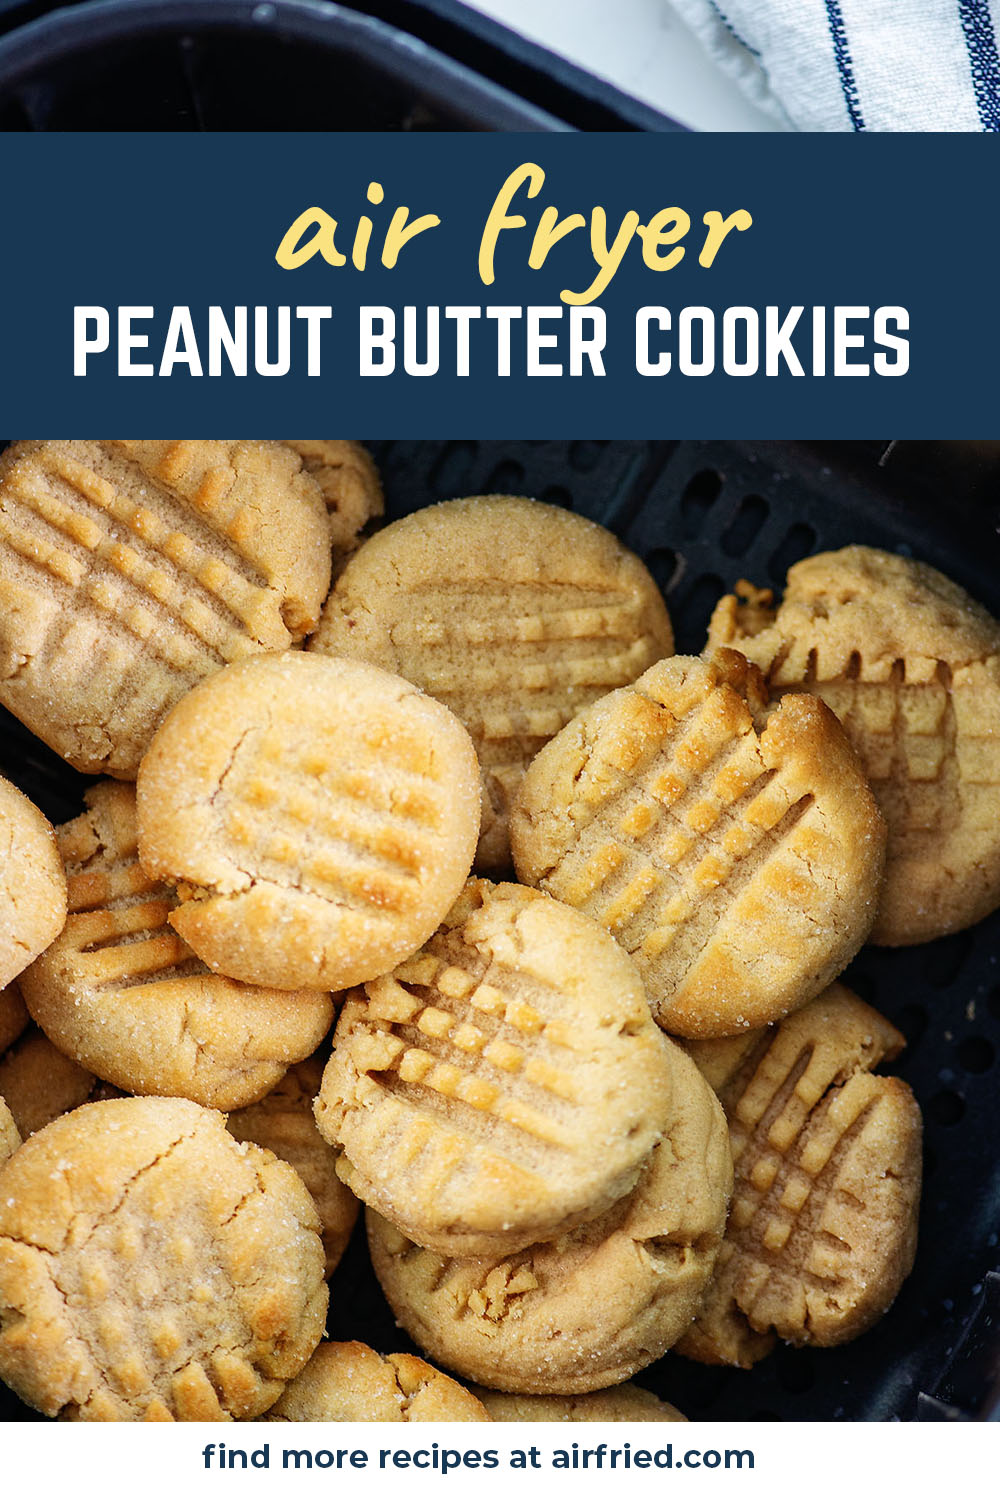 We use our air fryer to bake up these lovely air fried peanut butter cookies!  Find out how!